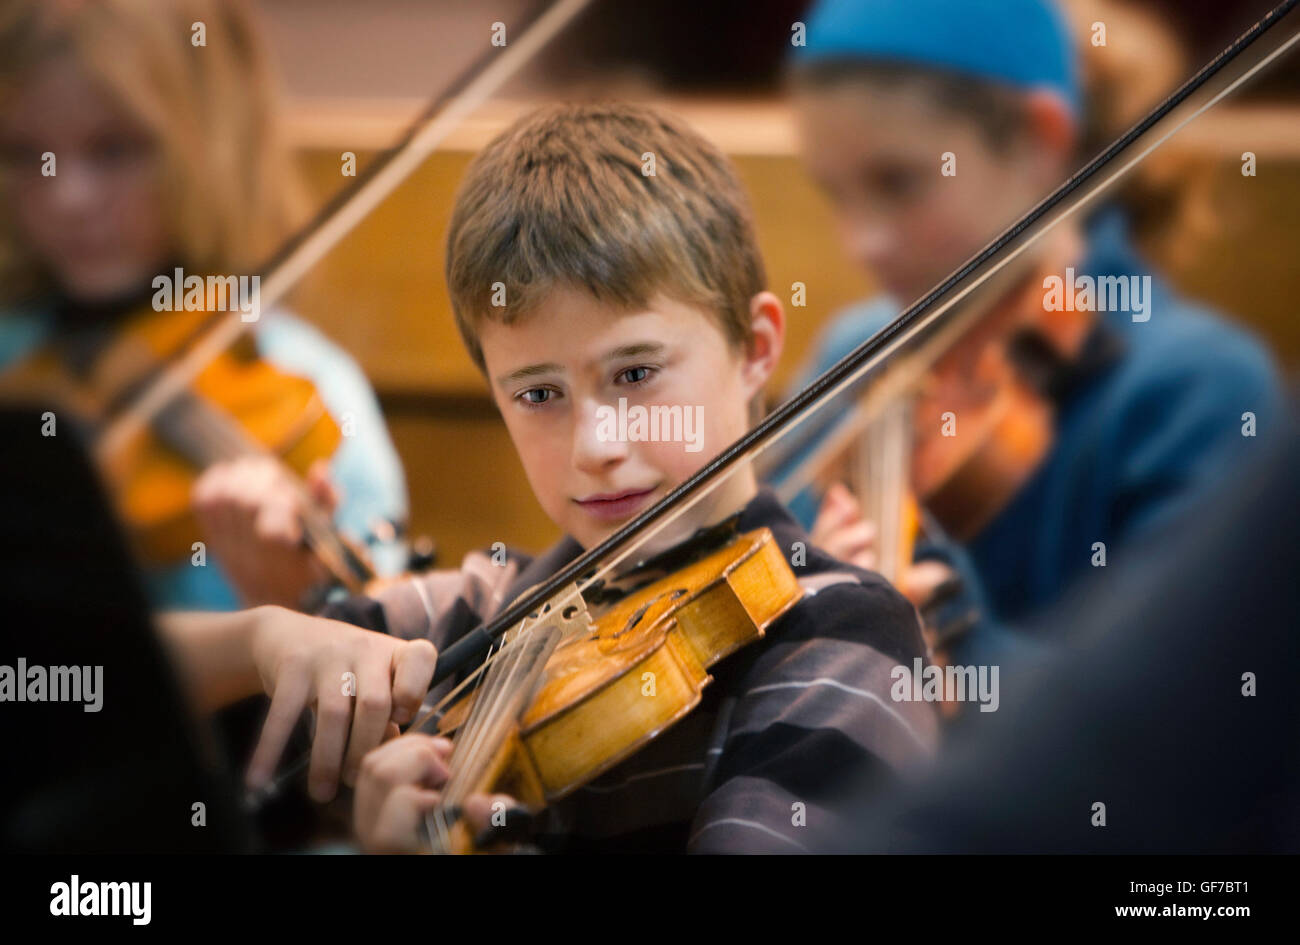 boy playing viola in orchestra Stock Photo